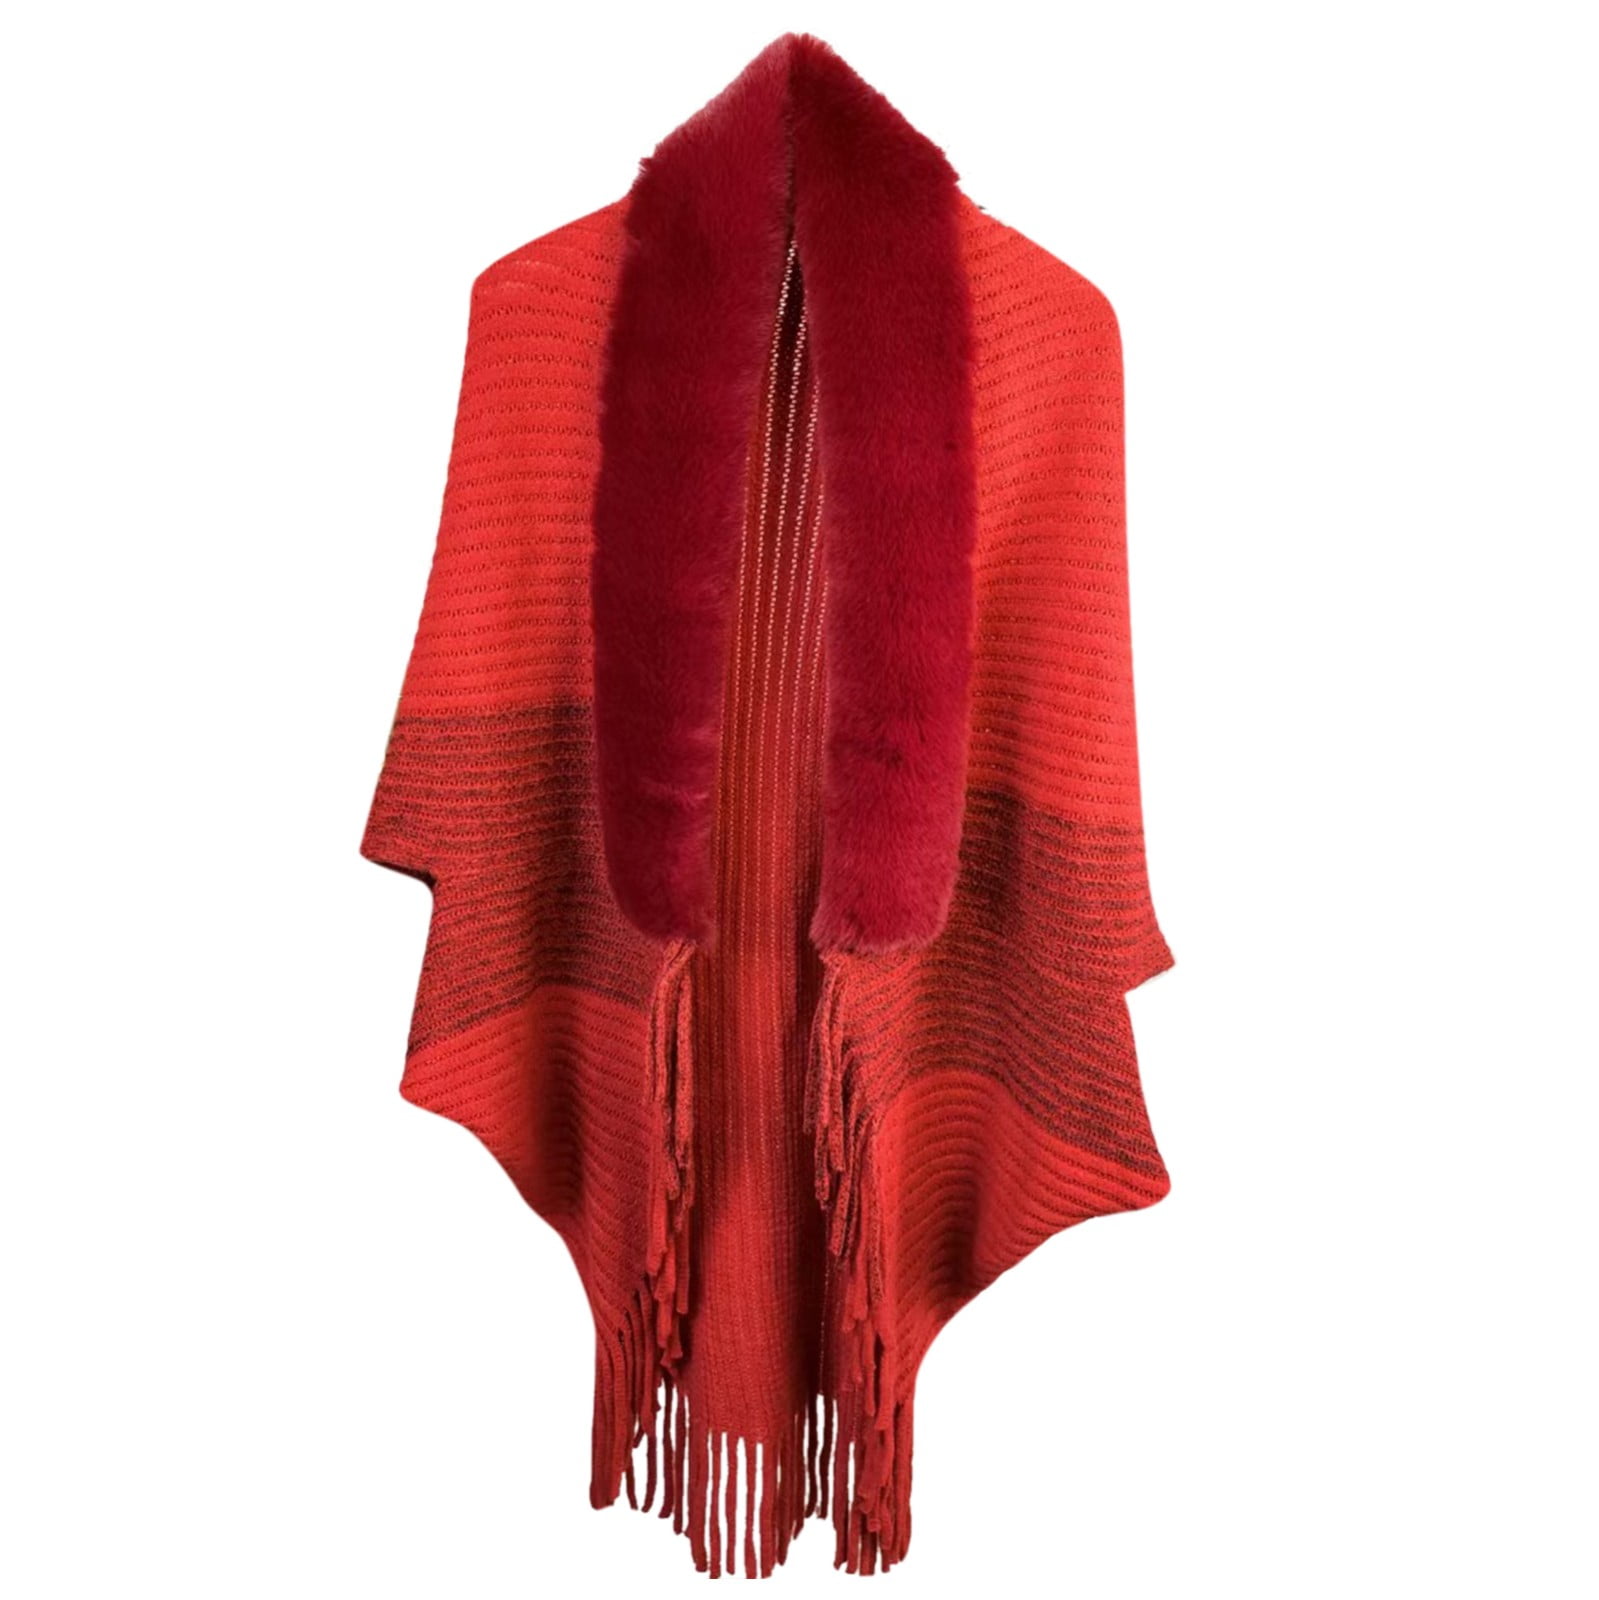 TAIAOJING Women's Scarf Shawls and Wraps Ladies Knitted Loose Thickened  Shawl Coat Plush Collar Scarf Wrap Tassel Fringed Wraps Cardigan Sweater  Splicing Casual Scarf 